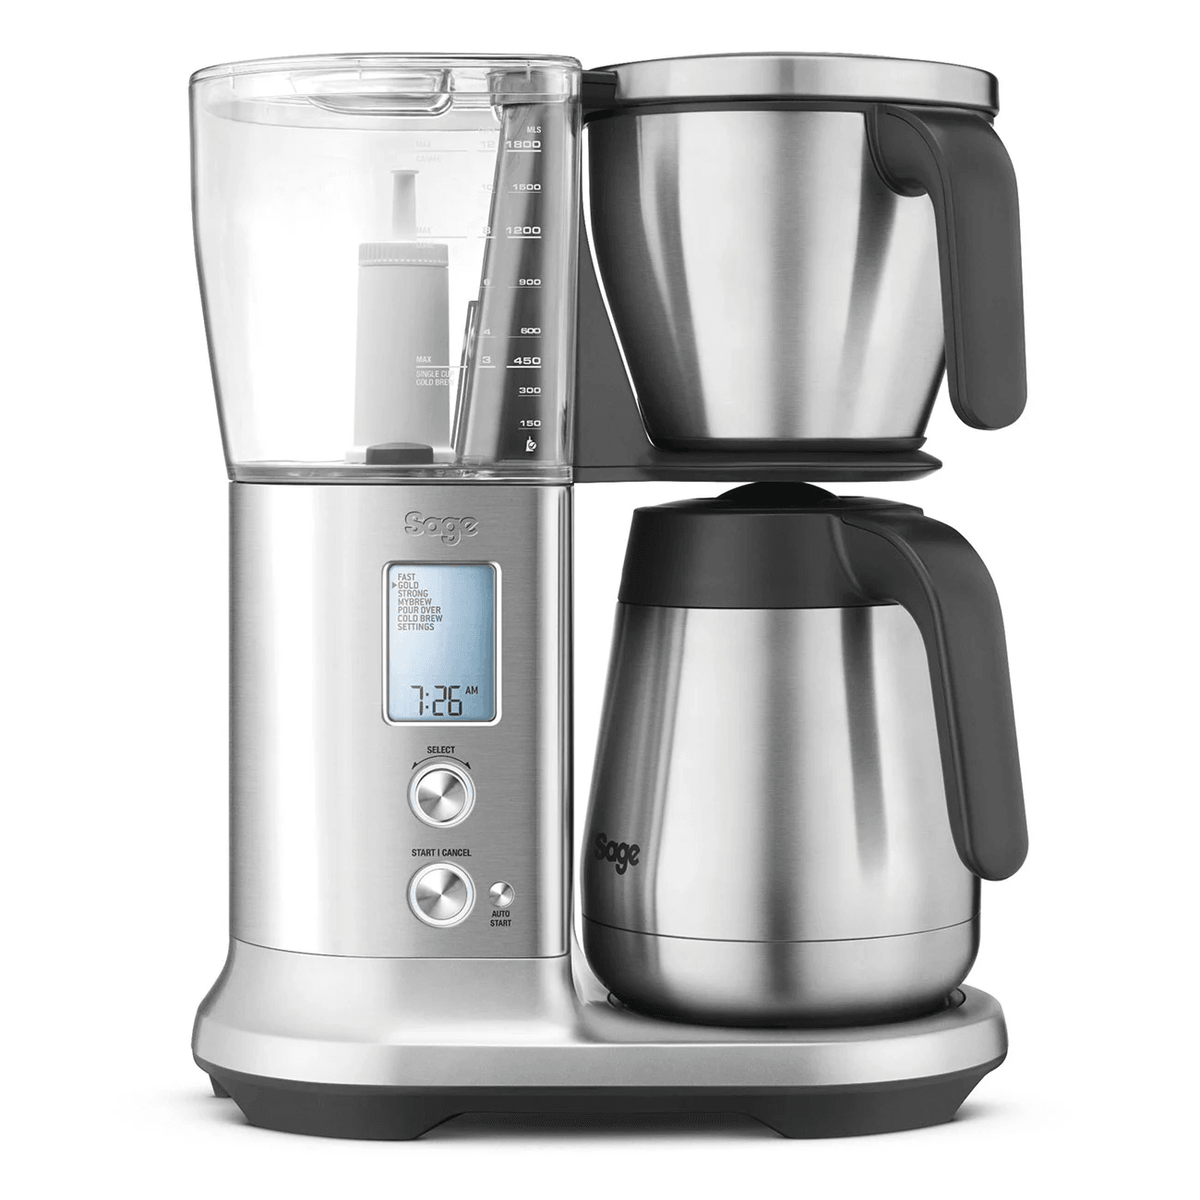 Sage Precision Brewer Thermal 1.7L Coffee Machine - Brushed Stainless Steel | SDC450BSS2GUK1 (7512449384636)